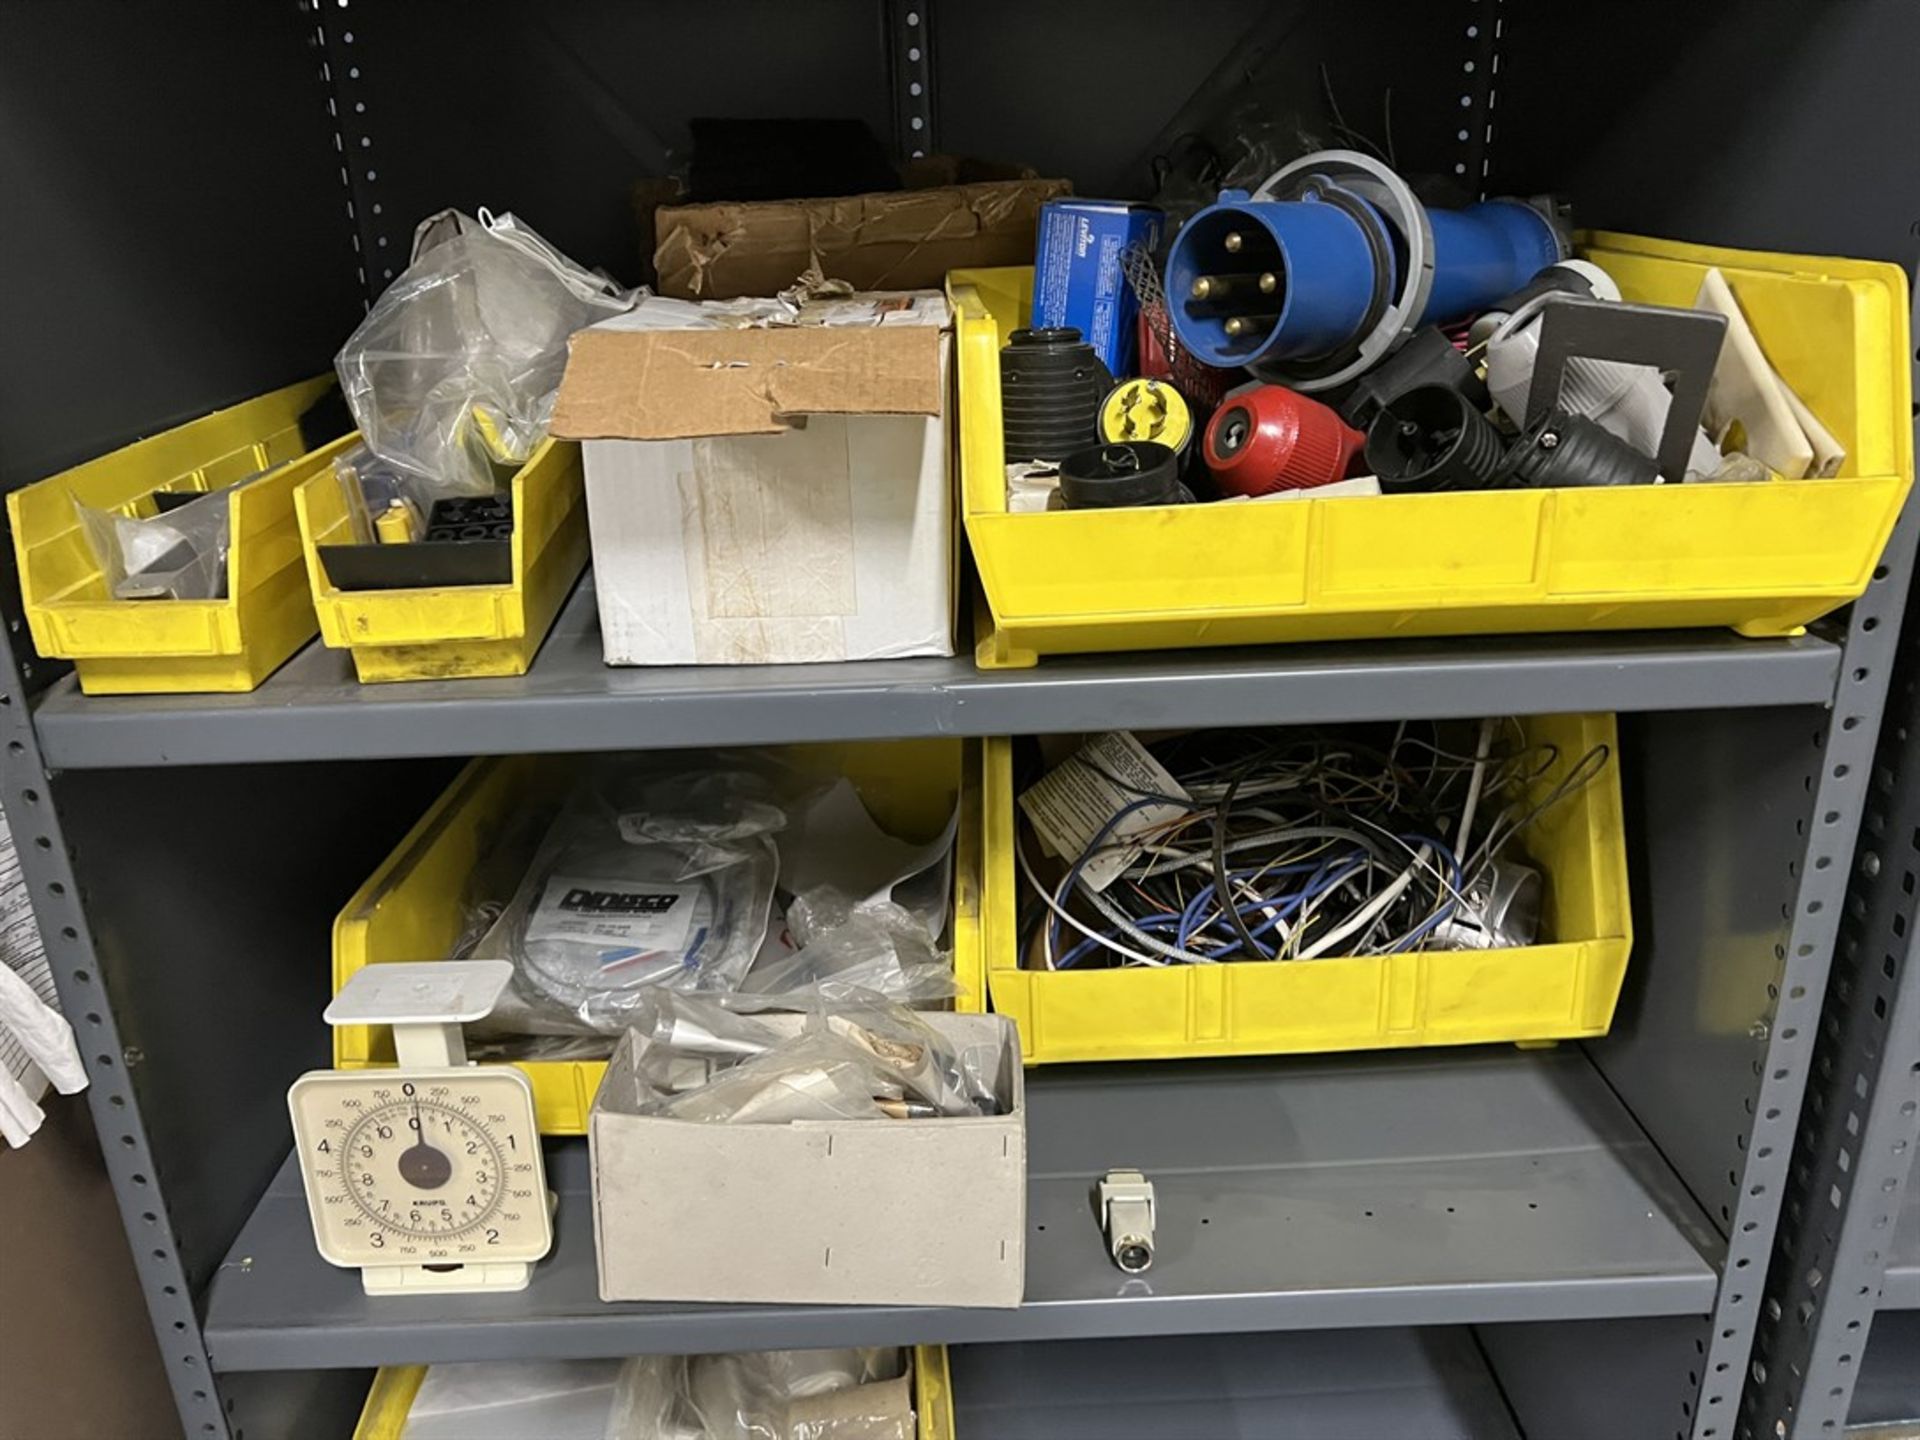 Lot of (2) Shop Shelving Units w/ Assorted Electrical Plugs and Cables - Image 5 of 5